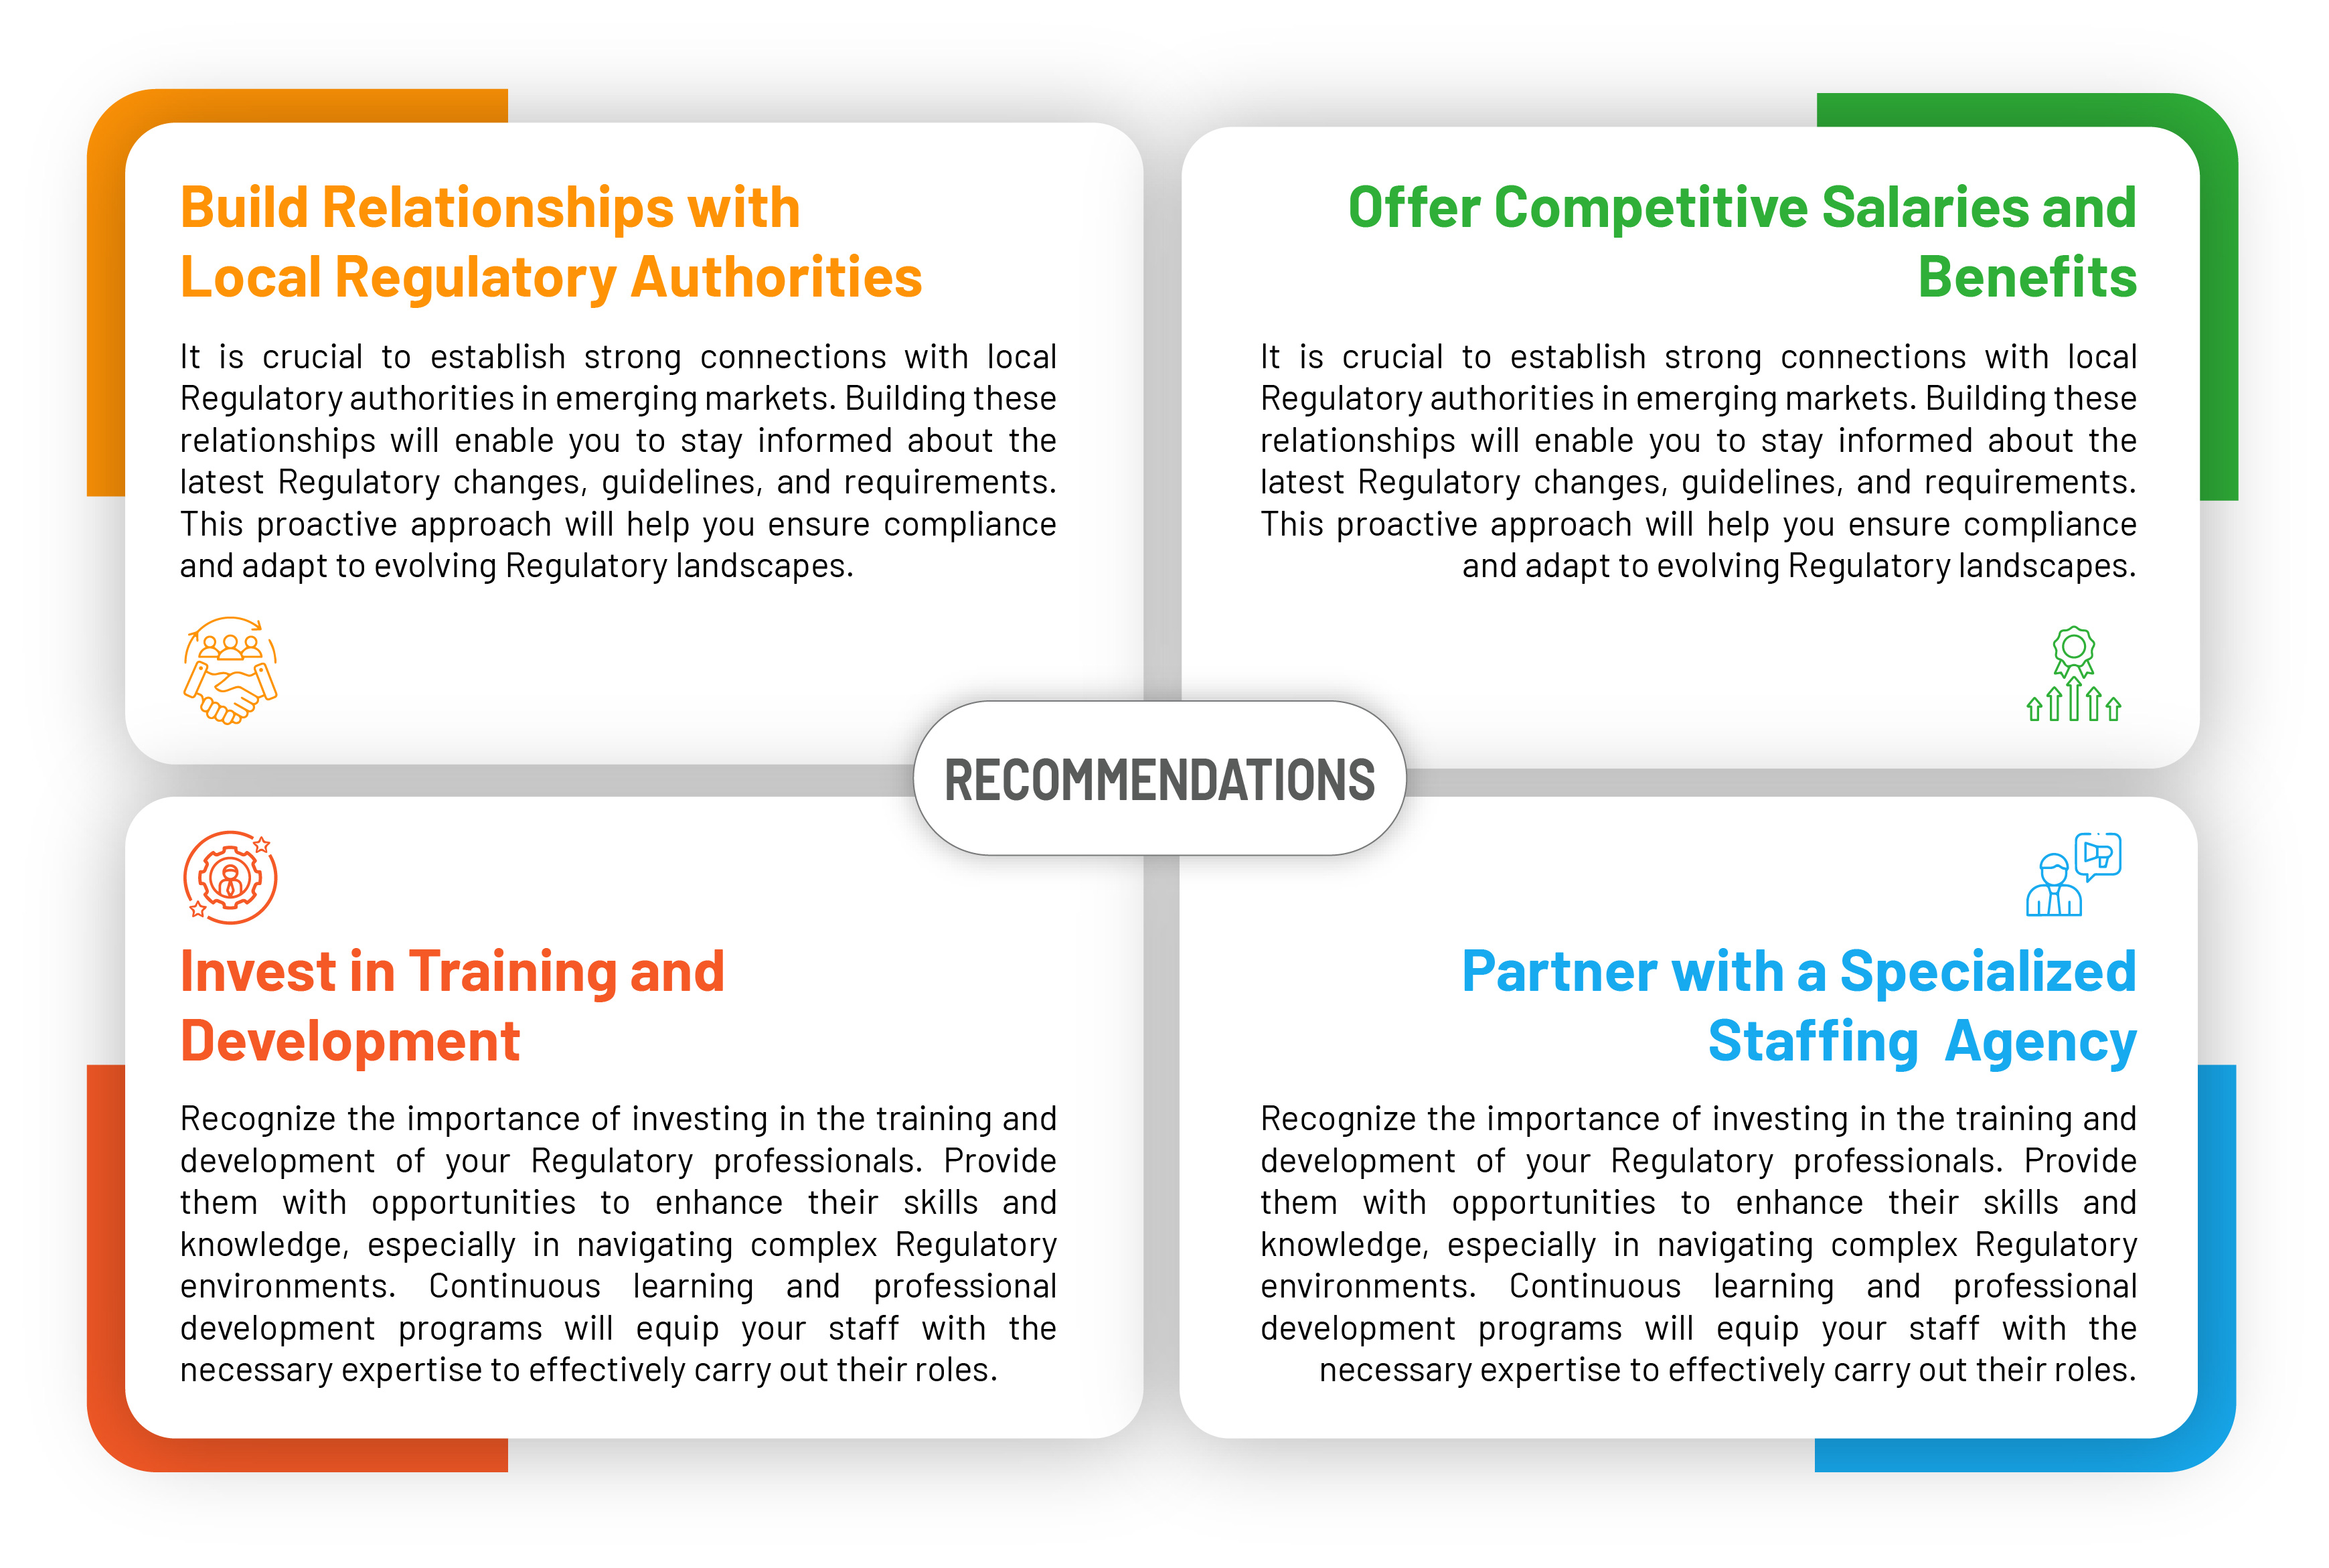 Recommendations for Overcoming the Challenges of Regulatory Staffing in Emerging Markets